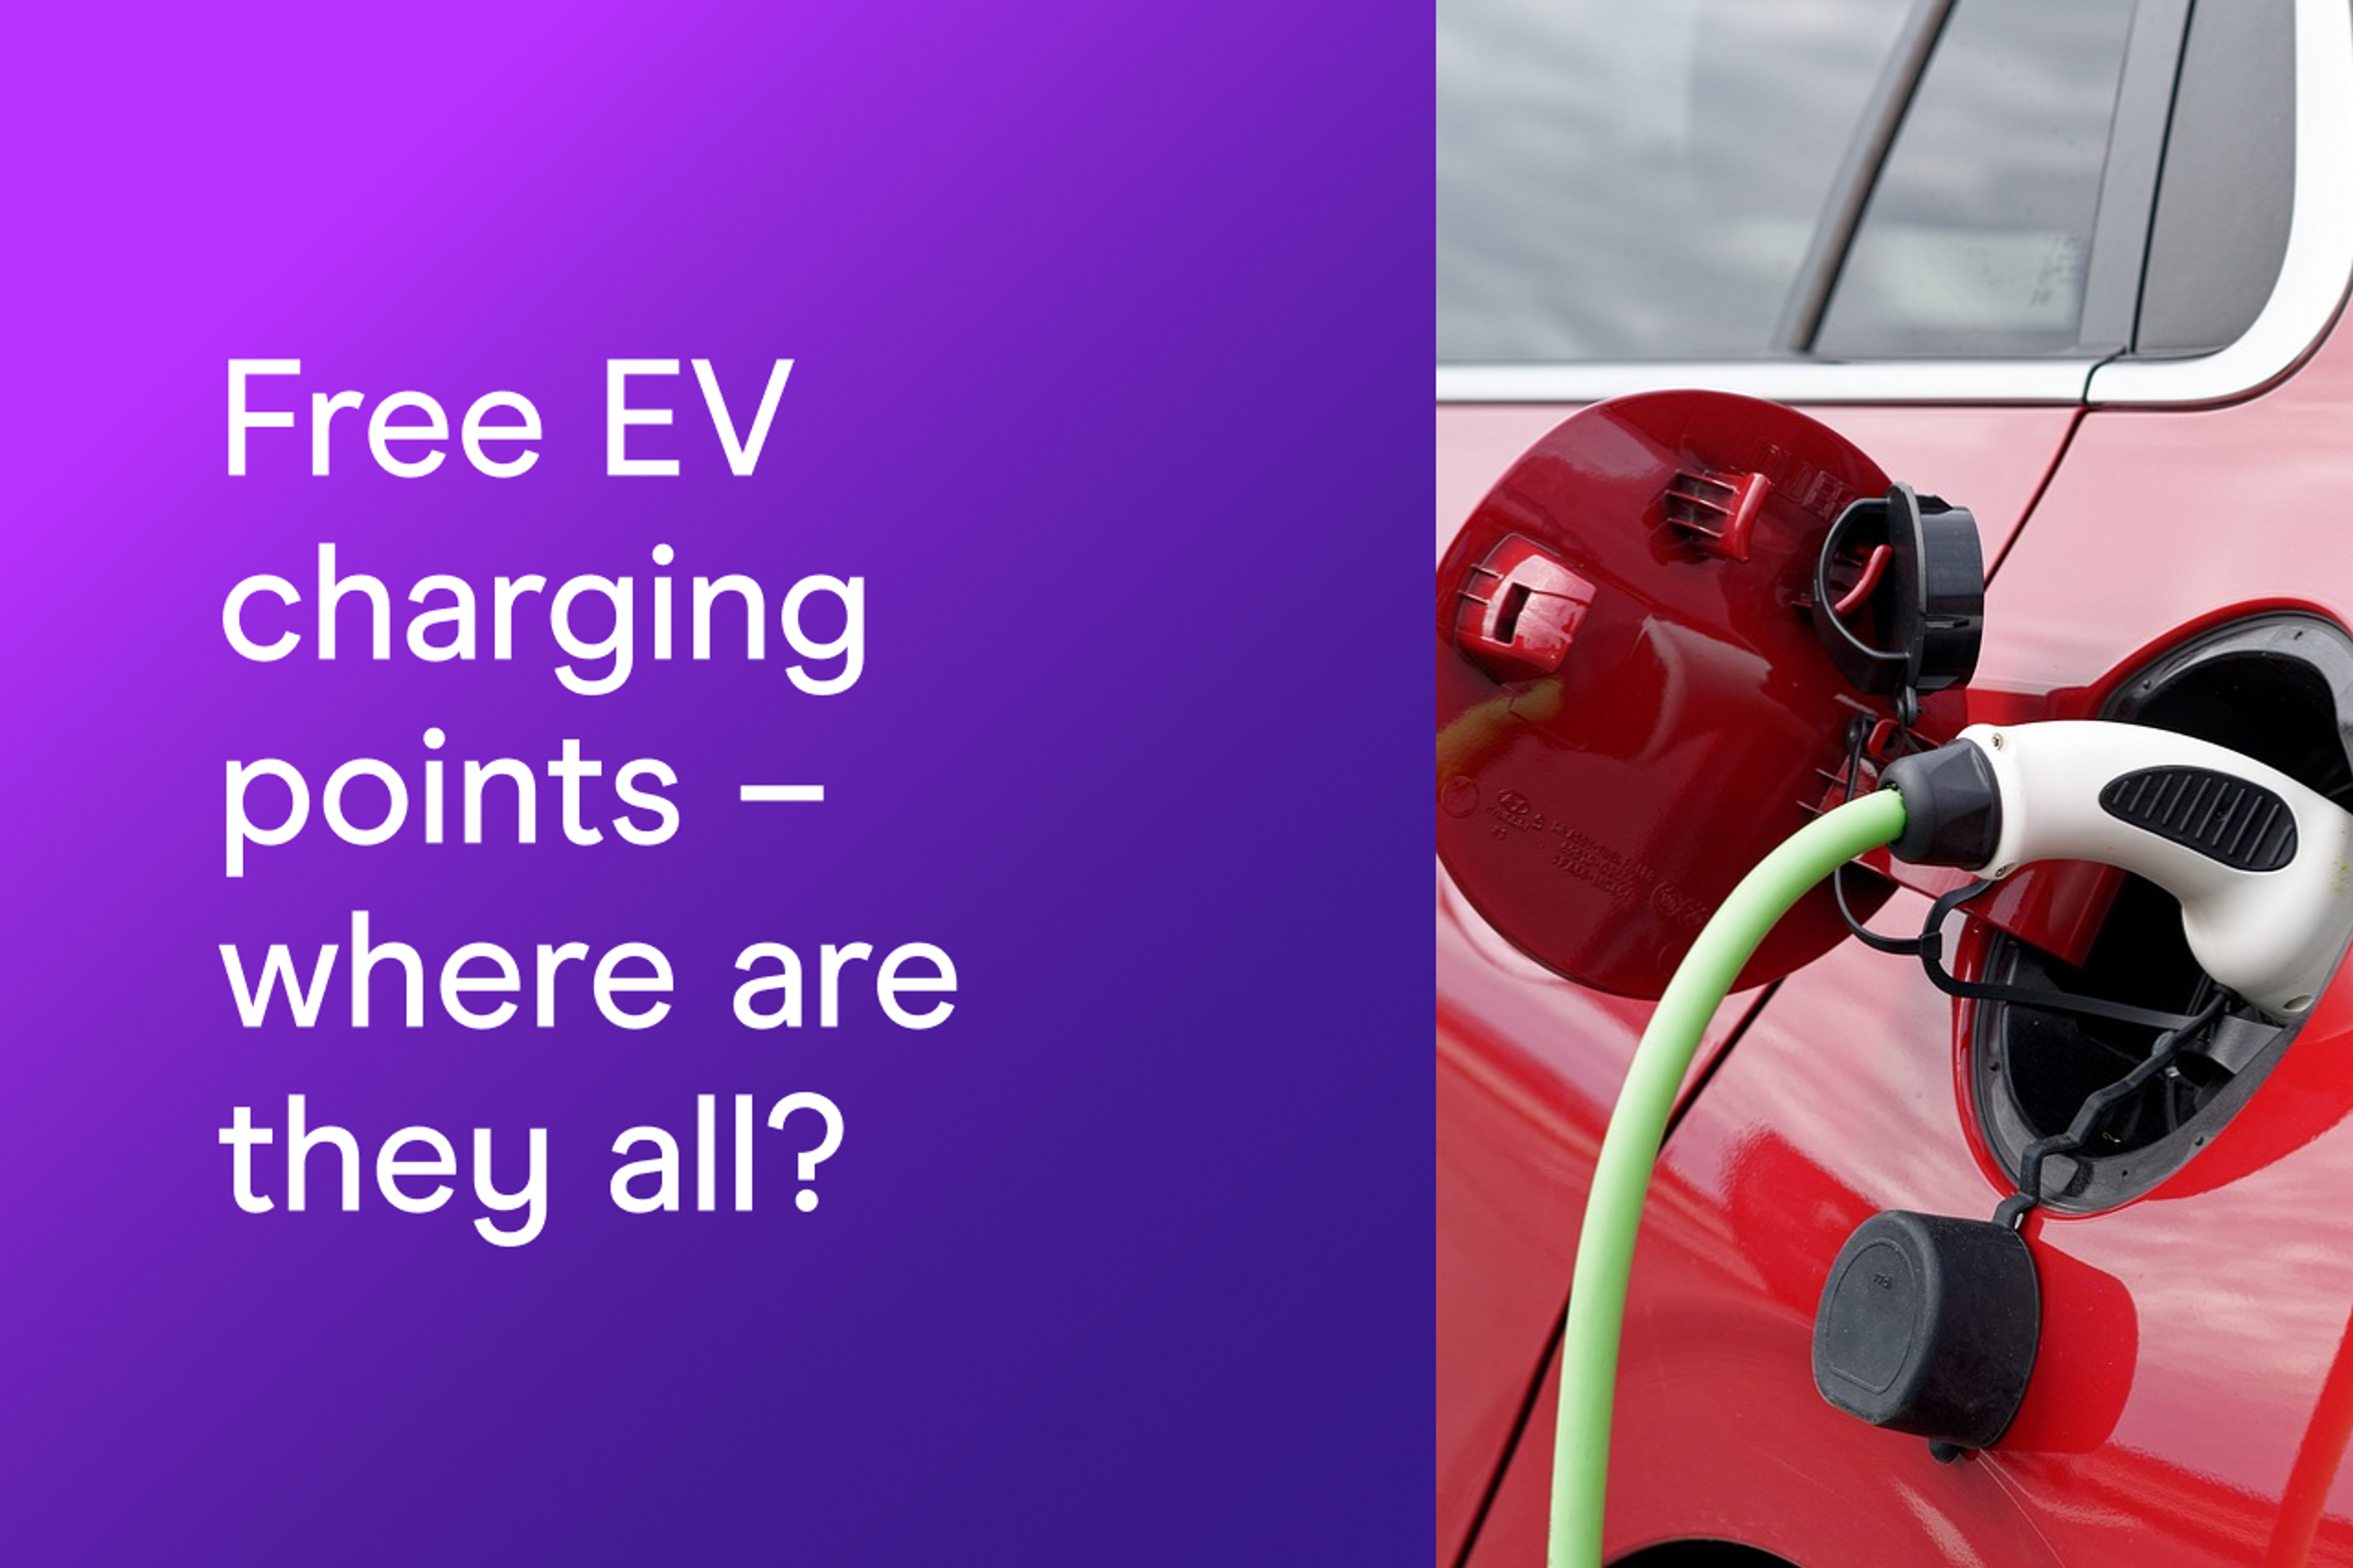 free EV charging points. Where are they all?